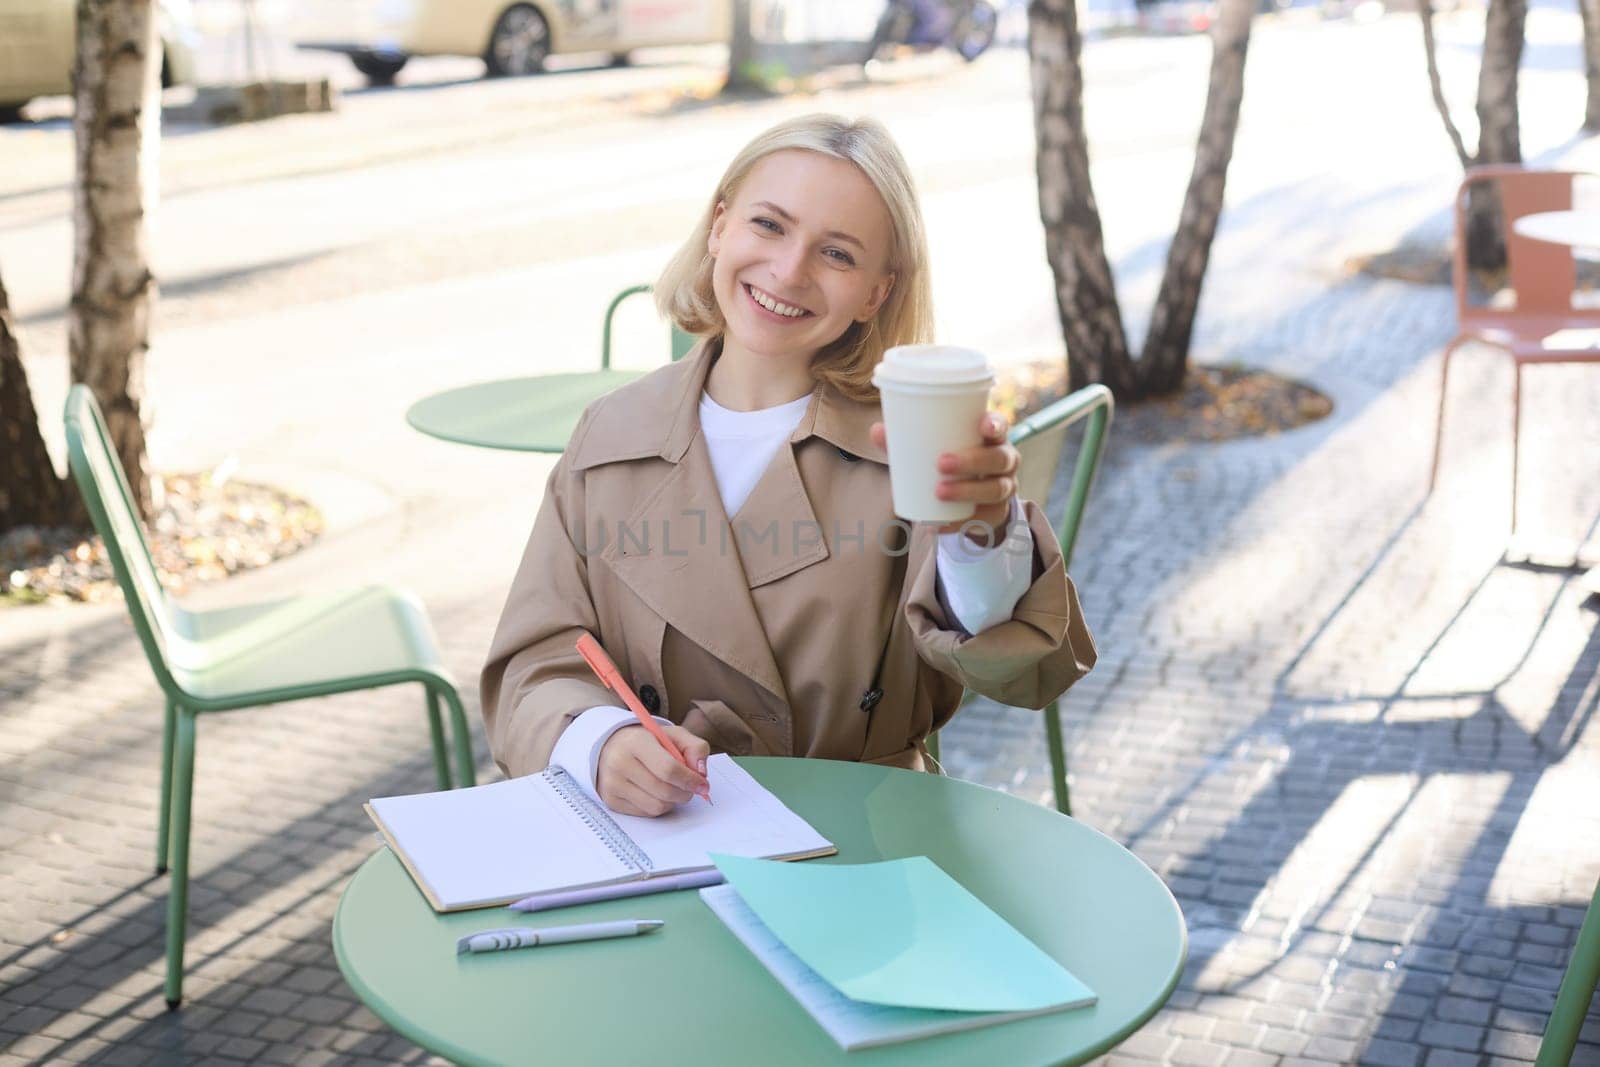 Smiling young blond woman, enjoying her coffee, drinking takeaway and sitting in street cafe, working on project, student doing homework, writing something in notebook, looking happy at camera.